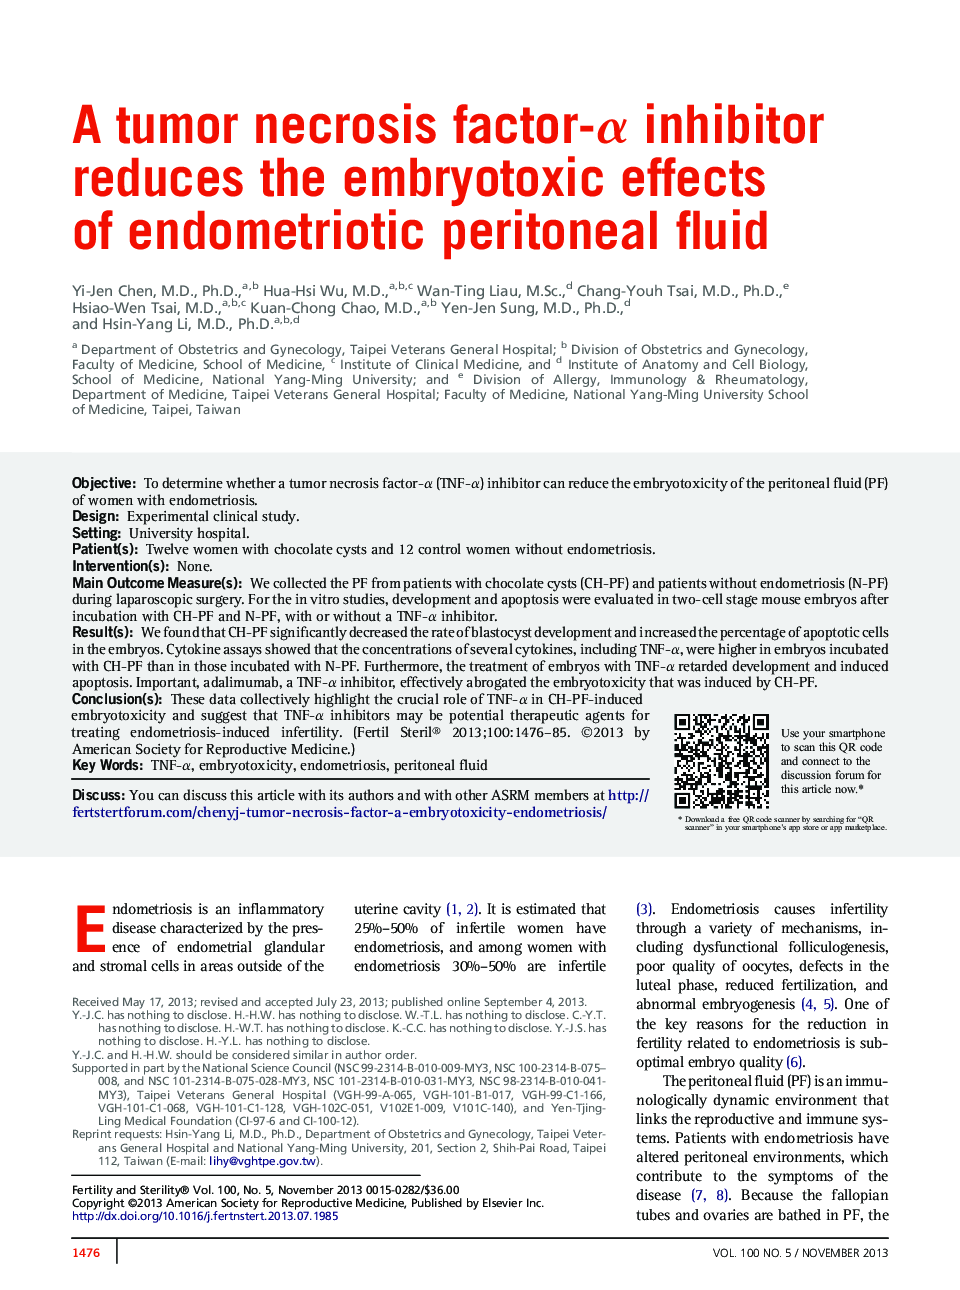 A tumor necrosis factor-Î± inhibitor reduces the embryotoxic effects of endometriotic peritoneal fluid